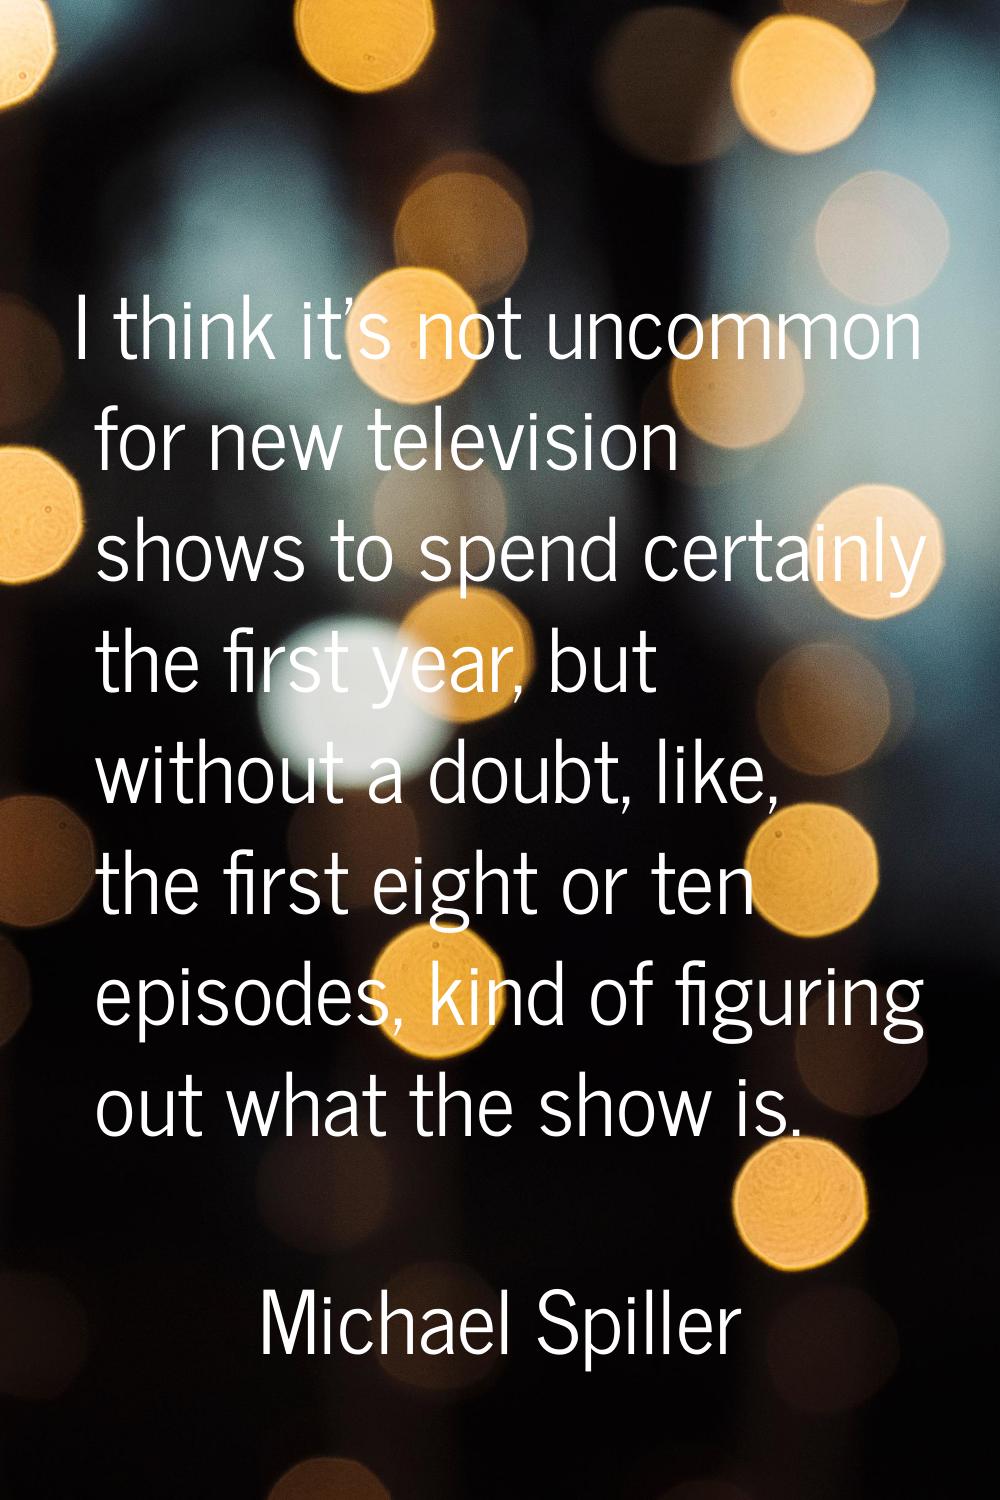 I think it's not uncommon for new television shows to spend certainly the first year, but without a